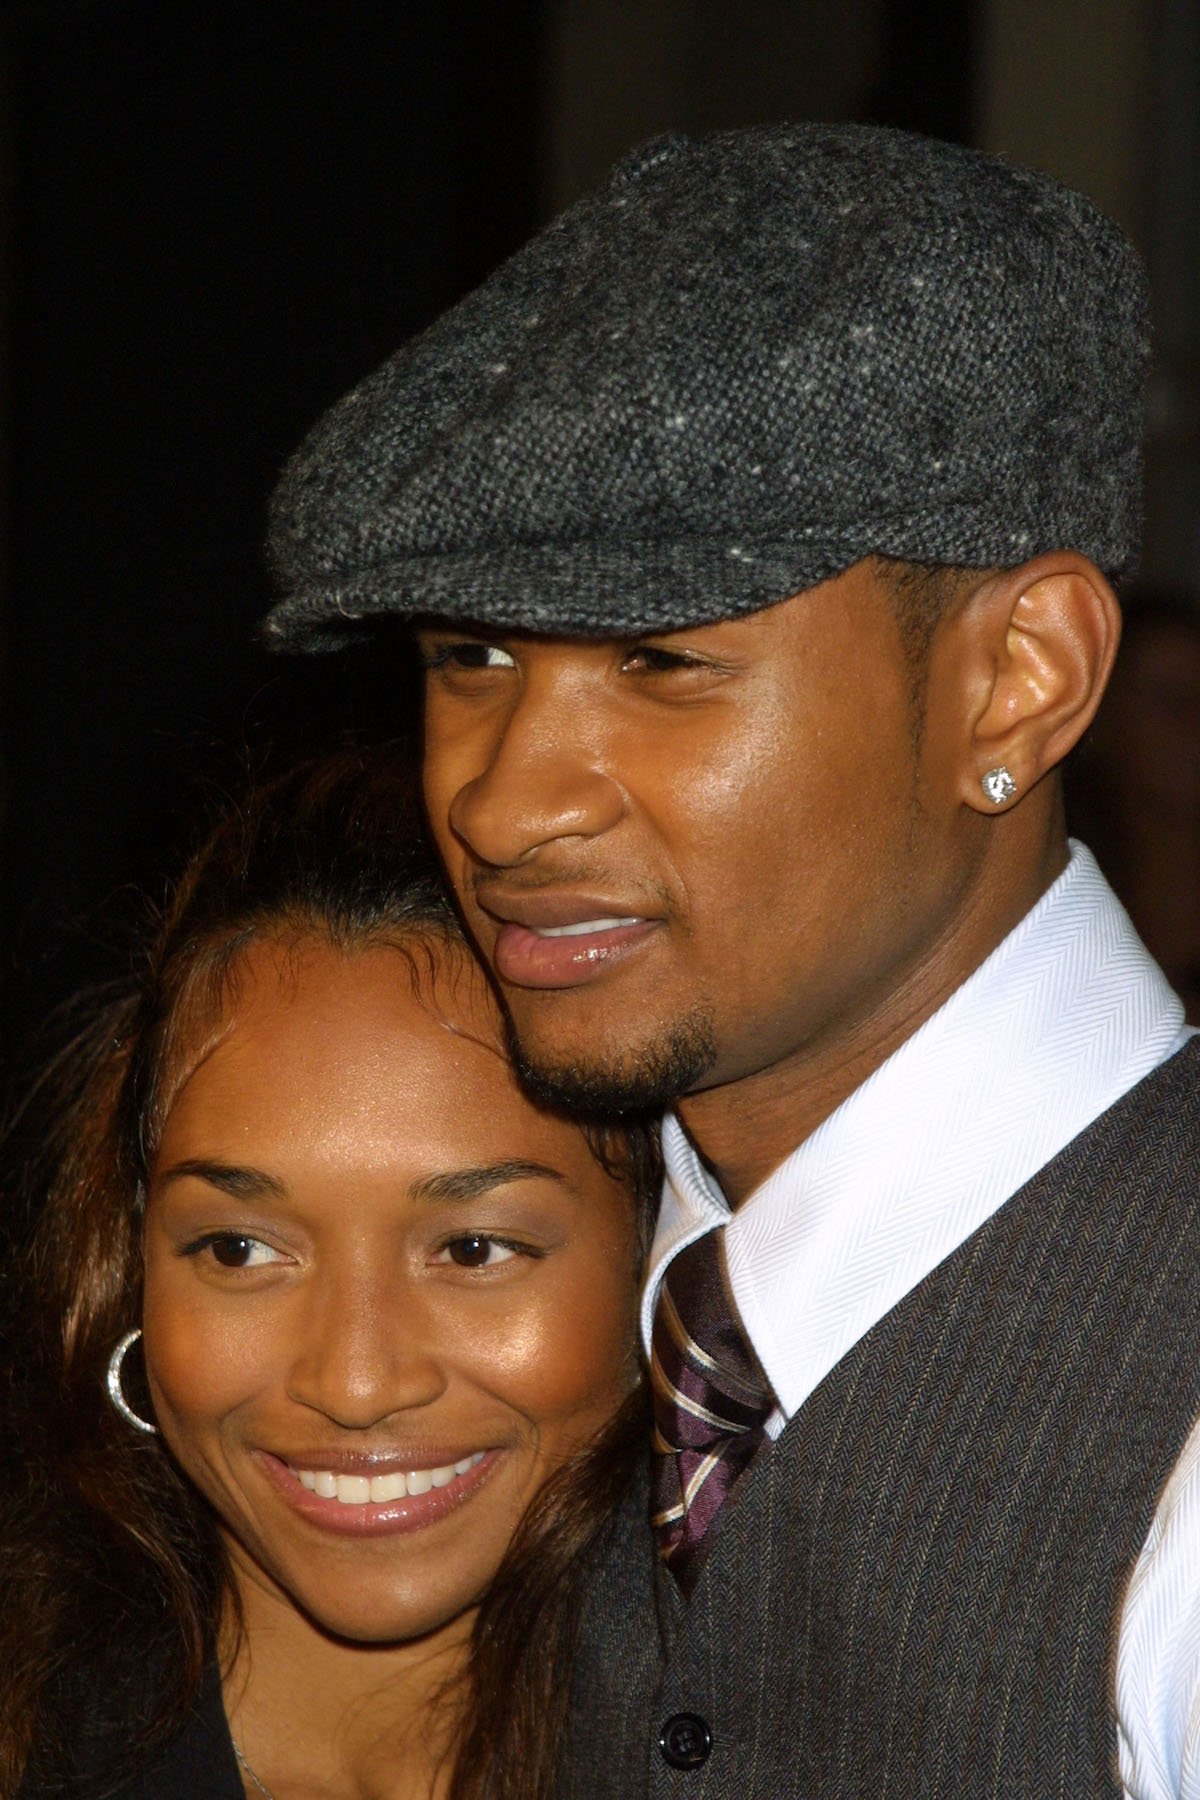 Newly married Usher reveals he once proposed to TLC's Chilli